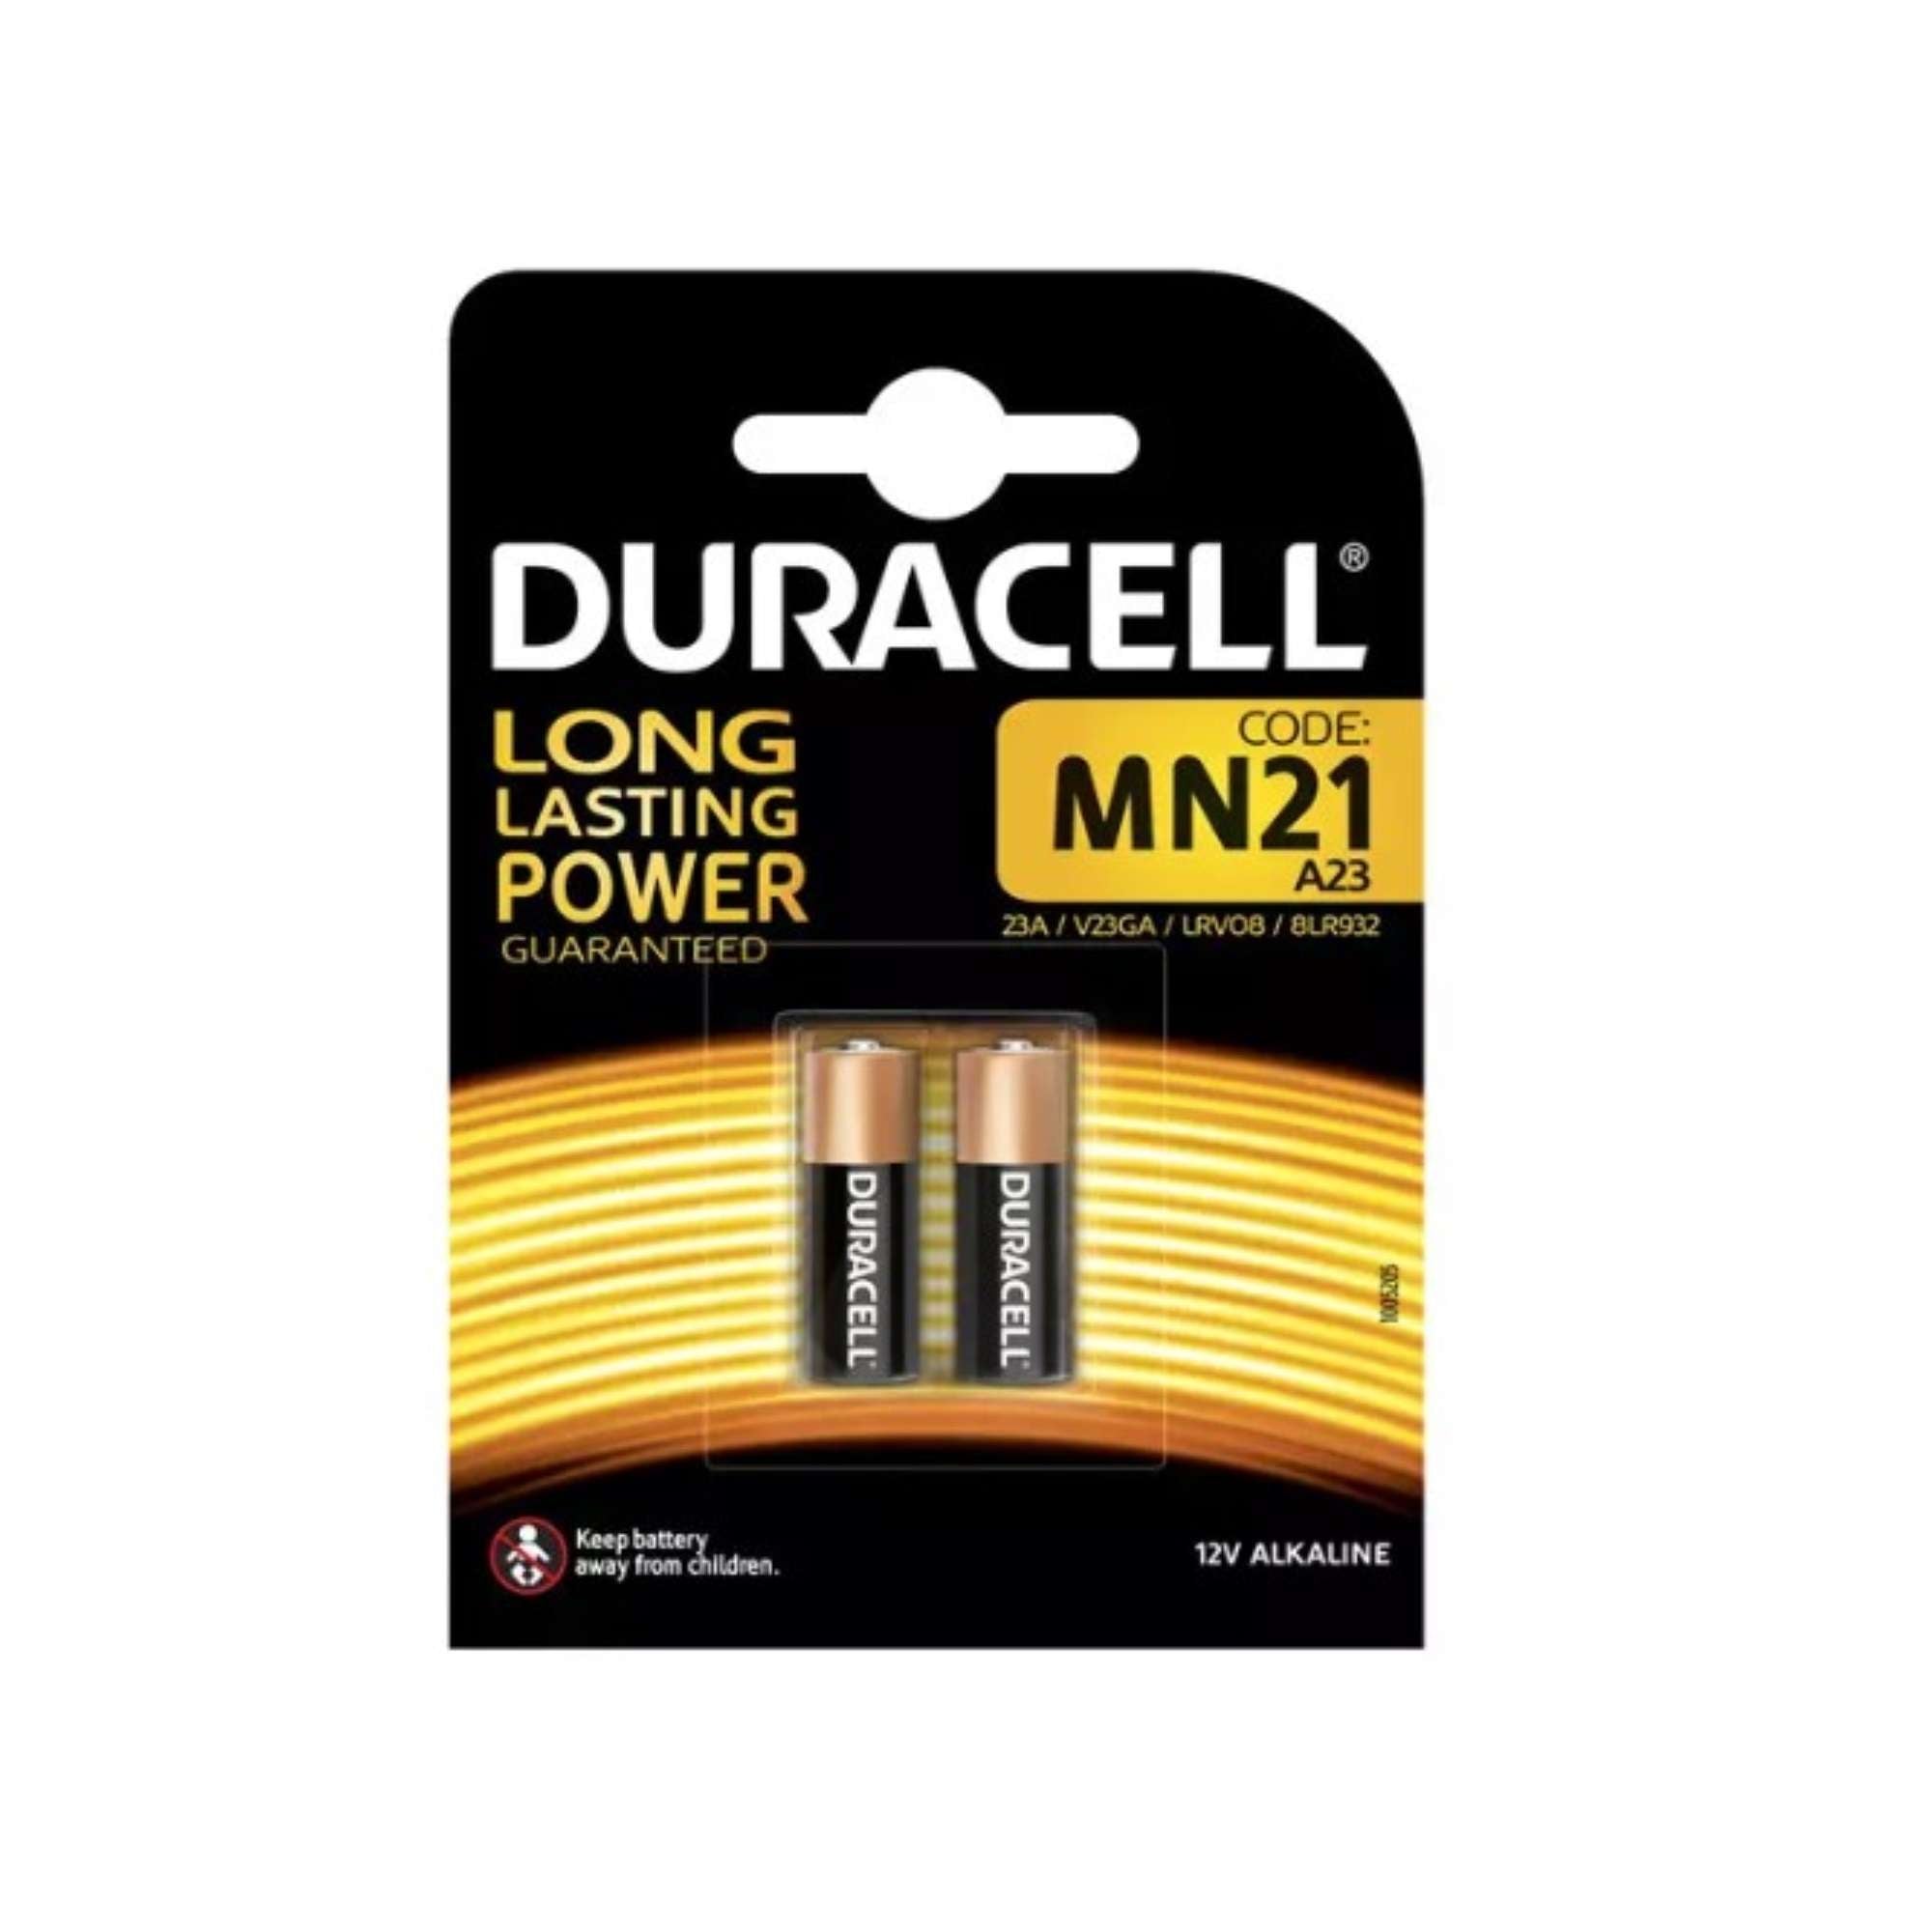 Alkaline batteries for remote controls 12V, 2 batteries - DURACELL MN21